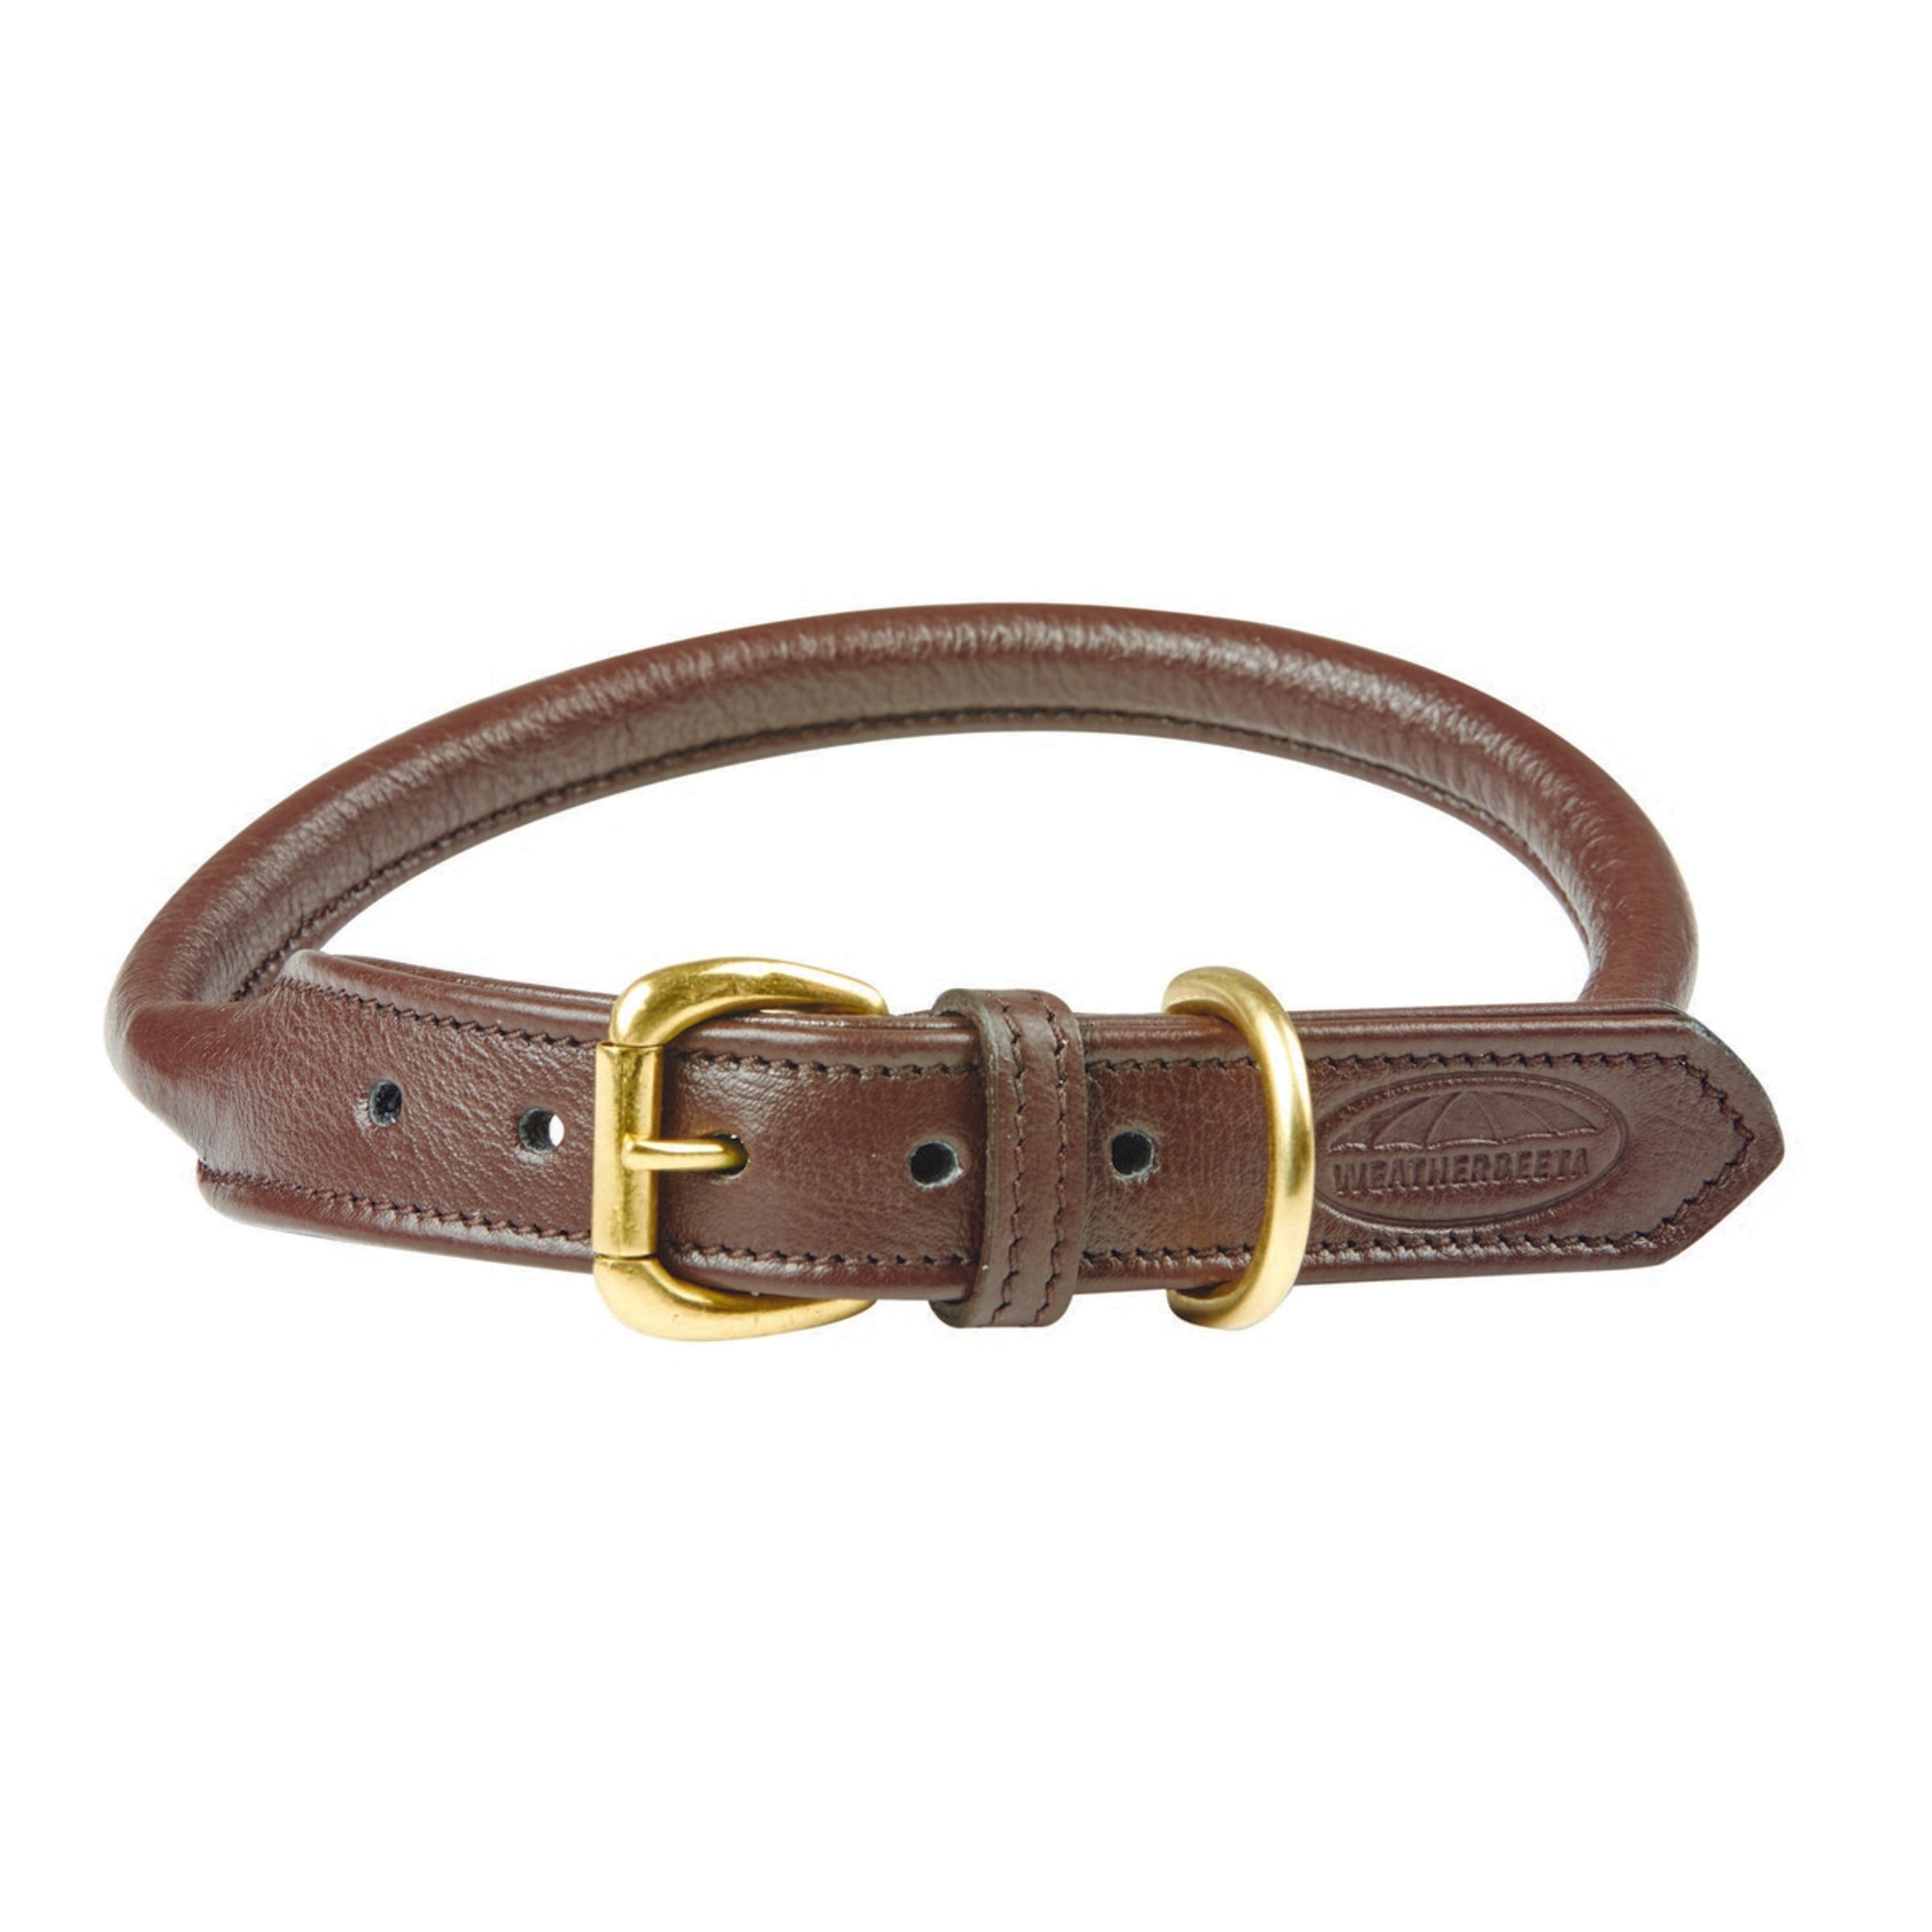 Weatherbeeta Collier pour Chien Rolled Leather Marron